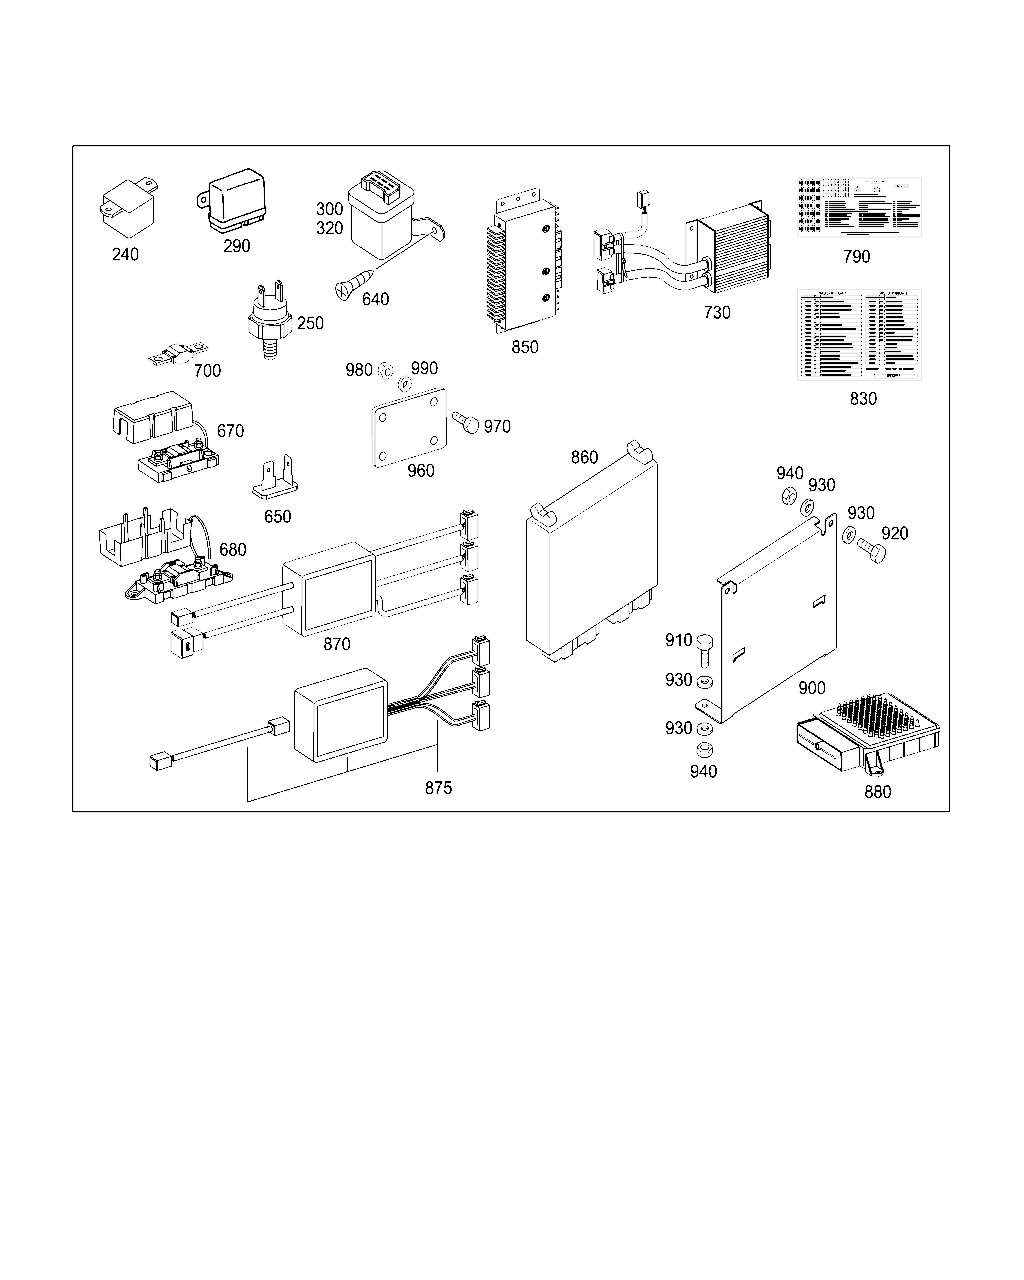 APPARATUS PLATE AND CONTROL UNITS [Автобус] MERCEDES [ЕВРОПА] [ШАССИ]OMC 1419 1423 1425 1426 1623 1625 1626